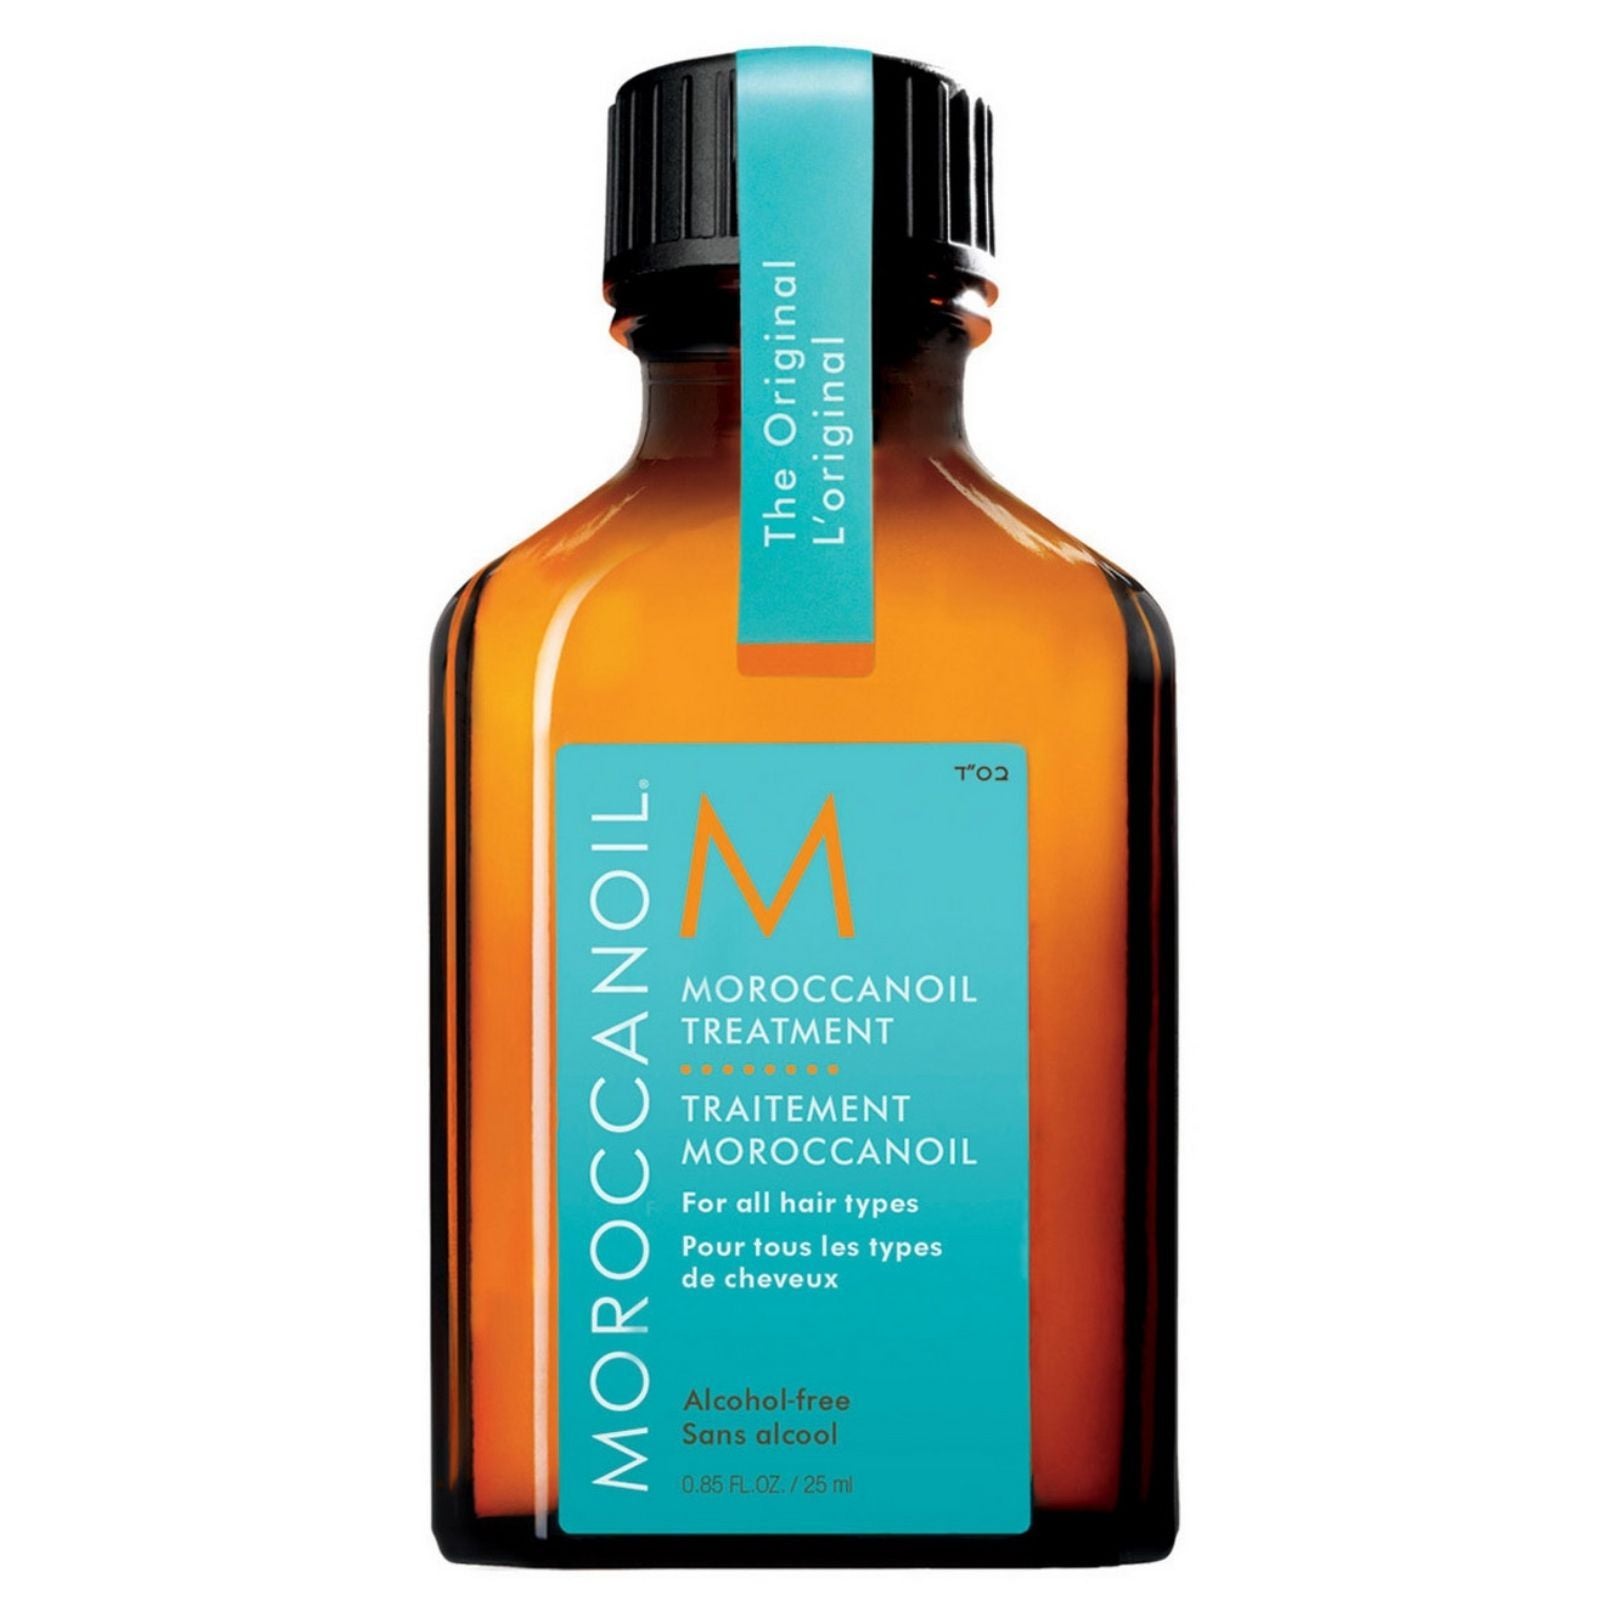 Free Gifts Moroccanoil | Moroccanoil Hair Treatment 25ml Free Gift - SkinShop